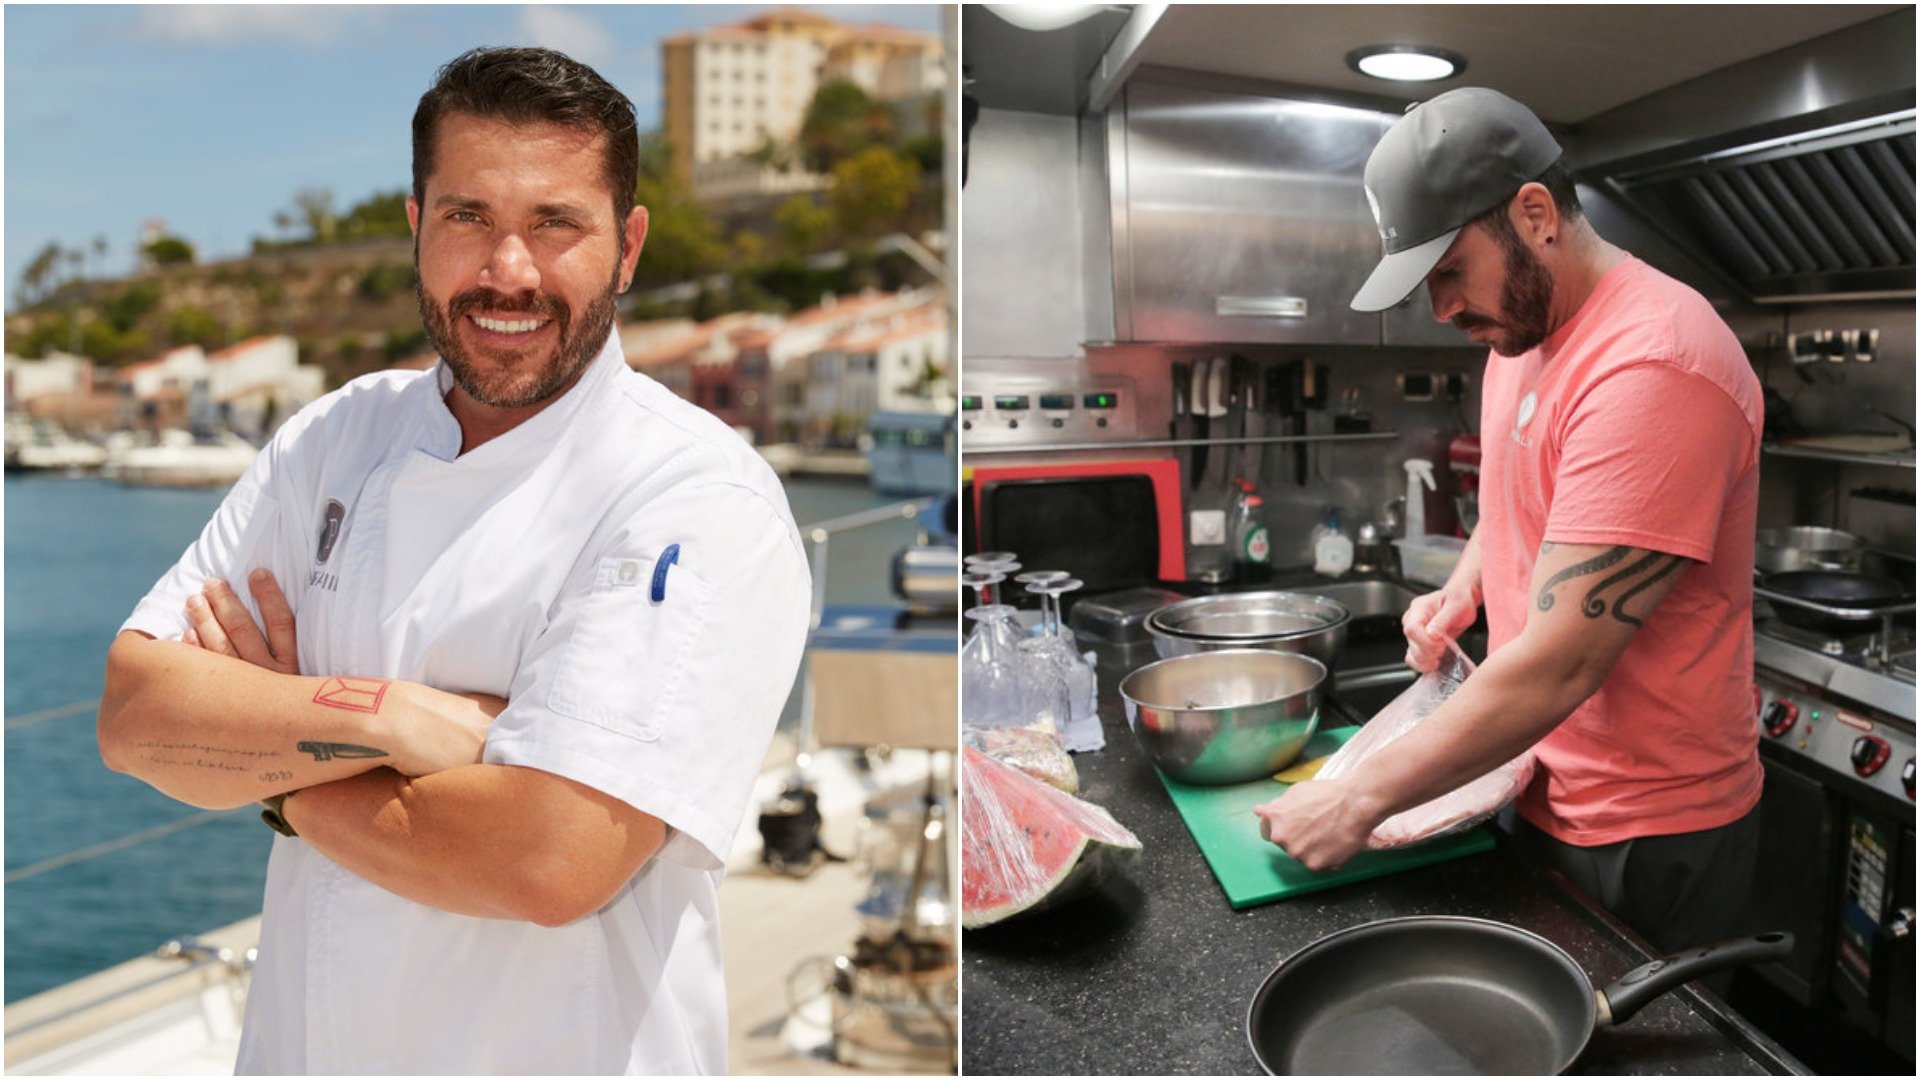 Chef Marcos Spaziani 'Below Deck Sailing Yacht' cast photo and working in the kitchen